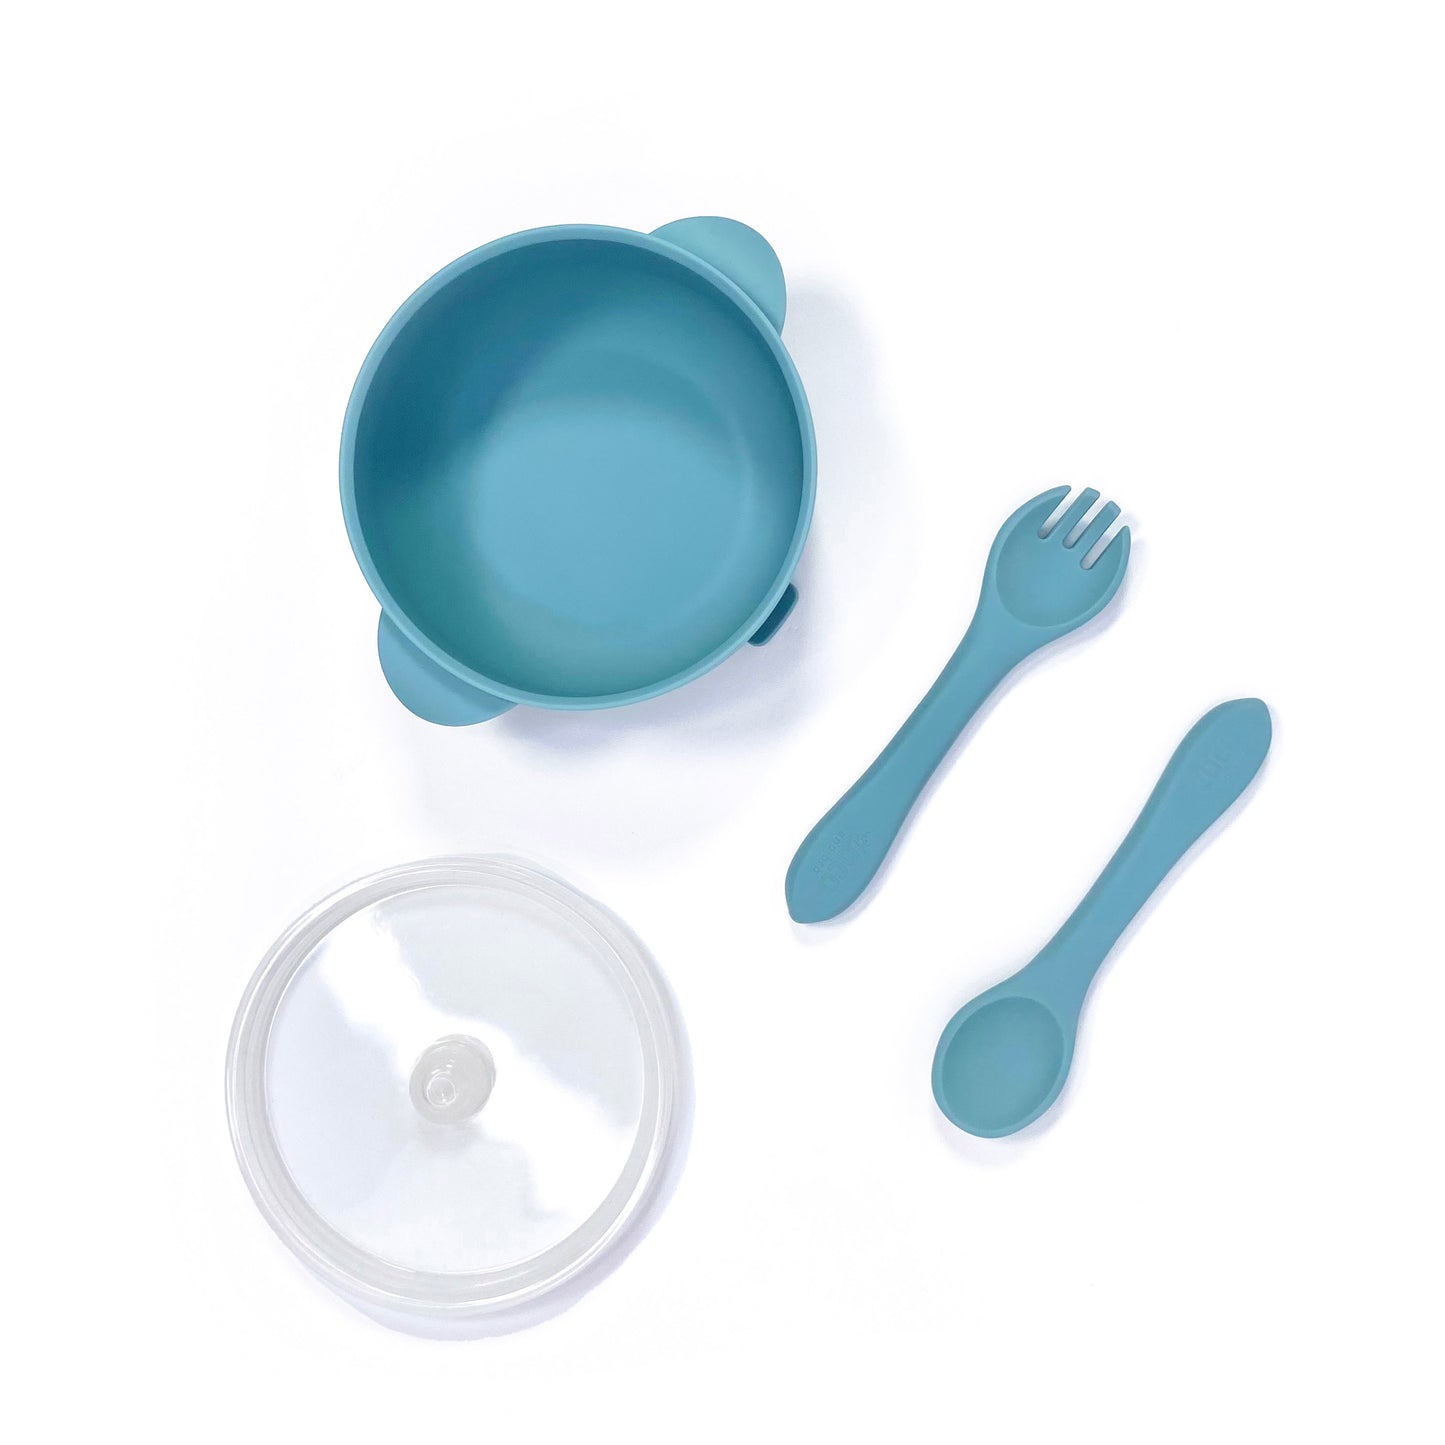 A sky blue silicone children’s feeding set, including silicone bowl with lid and matching silicone cutlery. Image shows the bowl, lid and cutlery separately, from above.